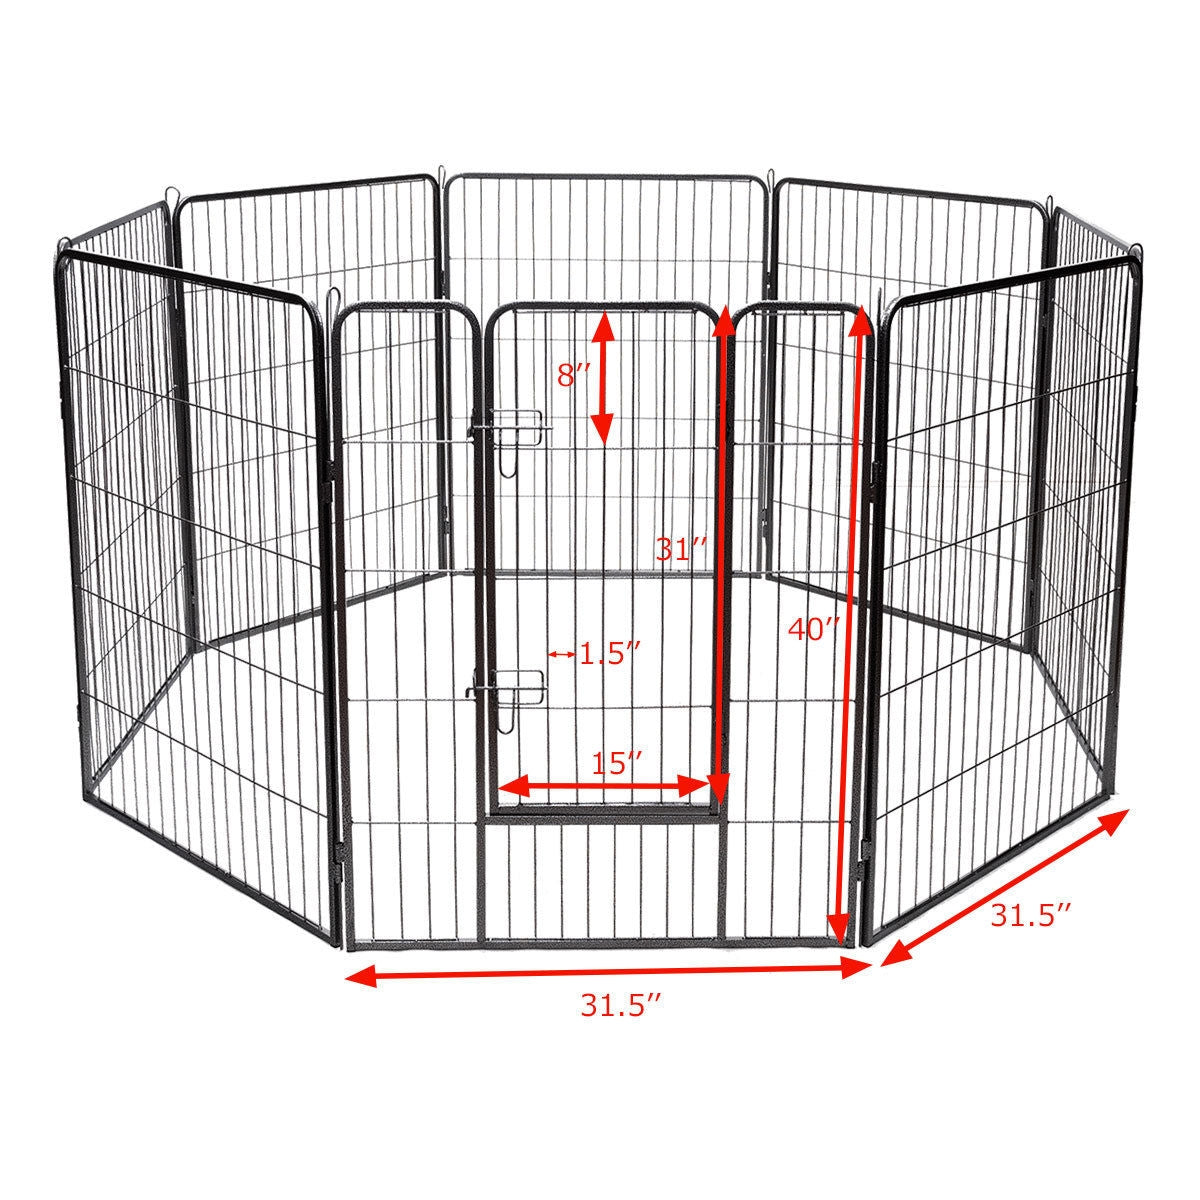 Petsjoy360 Dog Pet Playpen Premium Heavy-Duty Metal with 8 Panels 40" High Exercise Fence and Cage